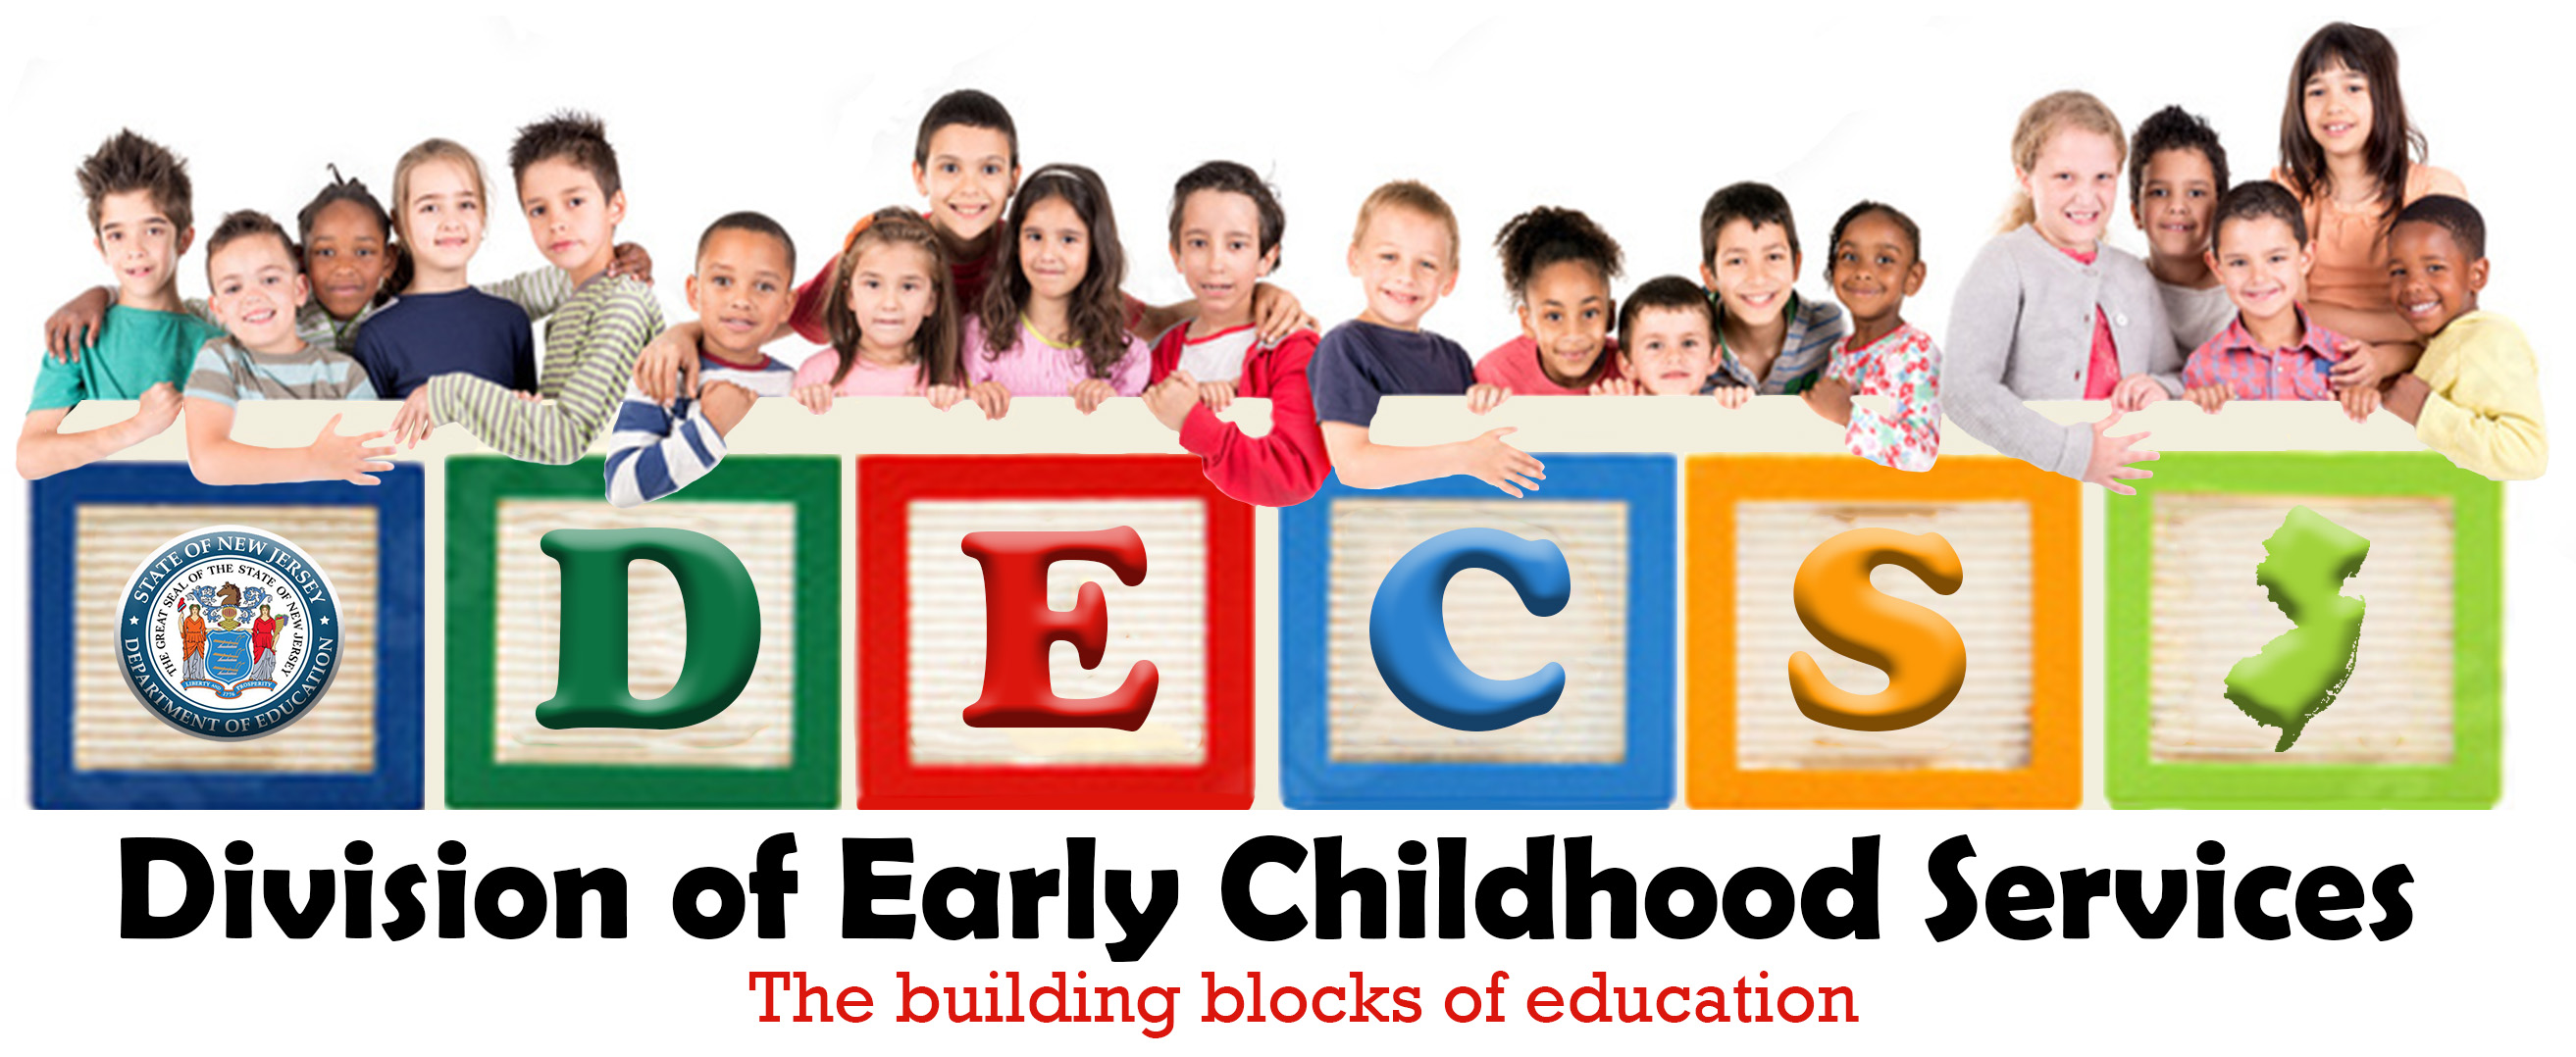 Logo: Division of Early Childhood Services (DECS). The building blocks of education. Young students standing behind giant wooden blocks that spell out DECS.